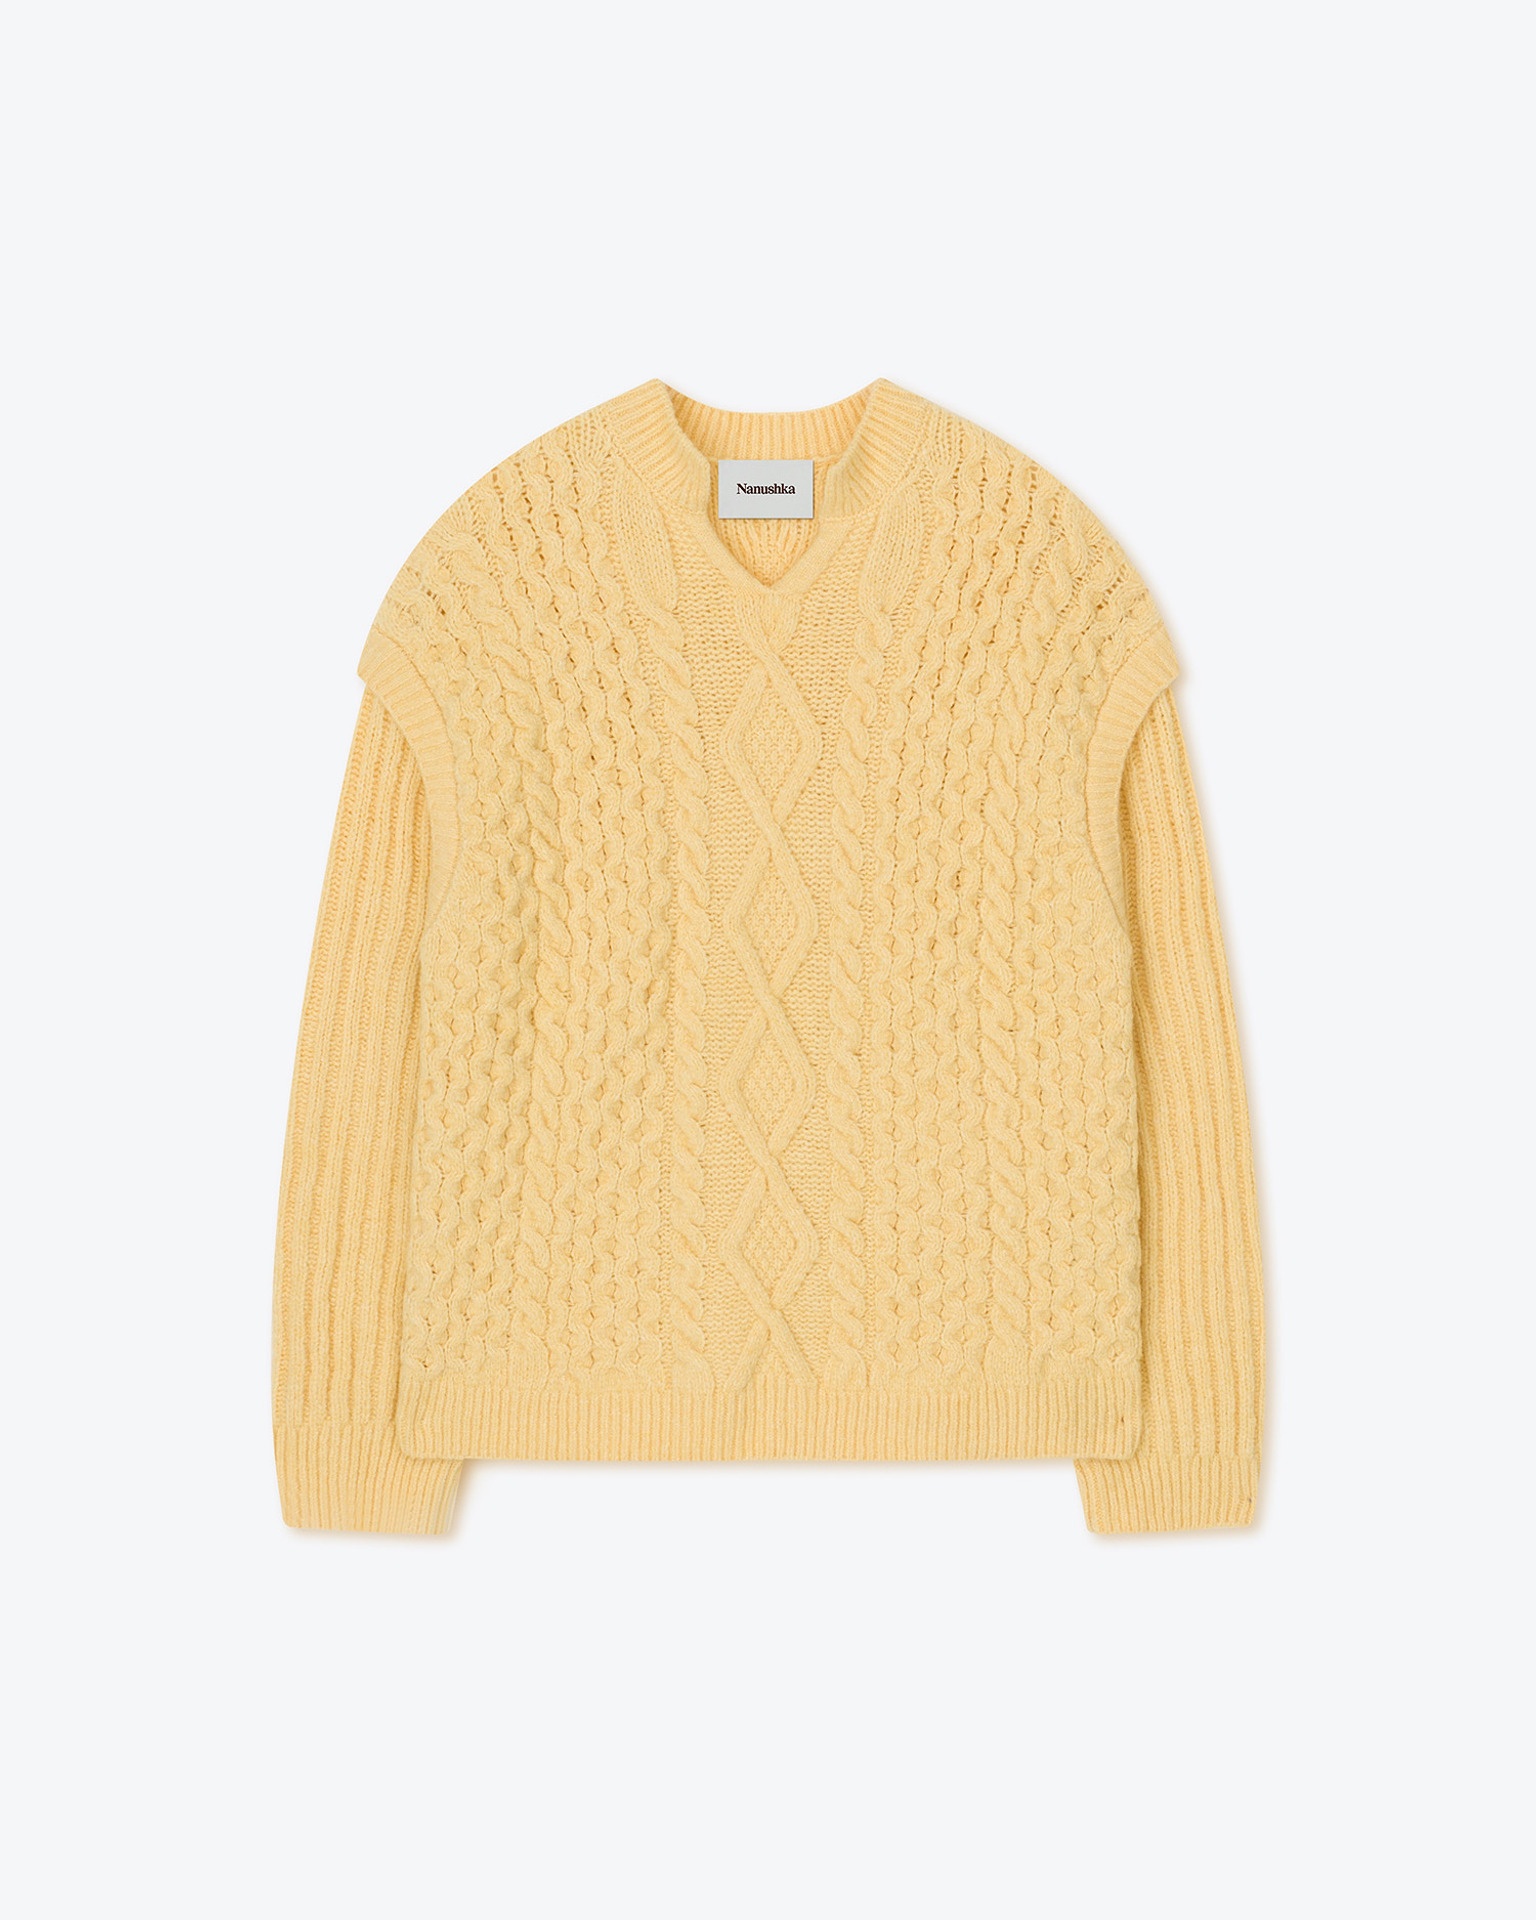 CELSO - Cashmere jumper - Pale yellow - 1